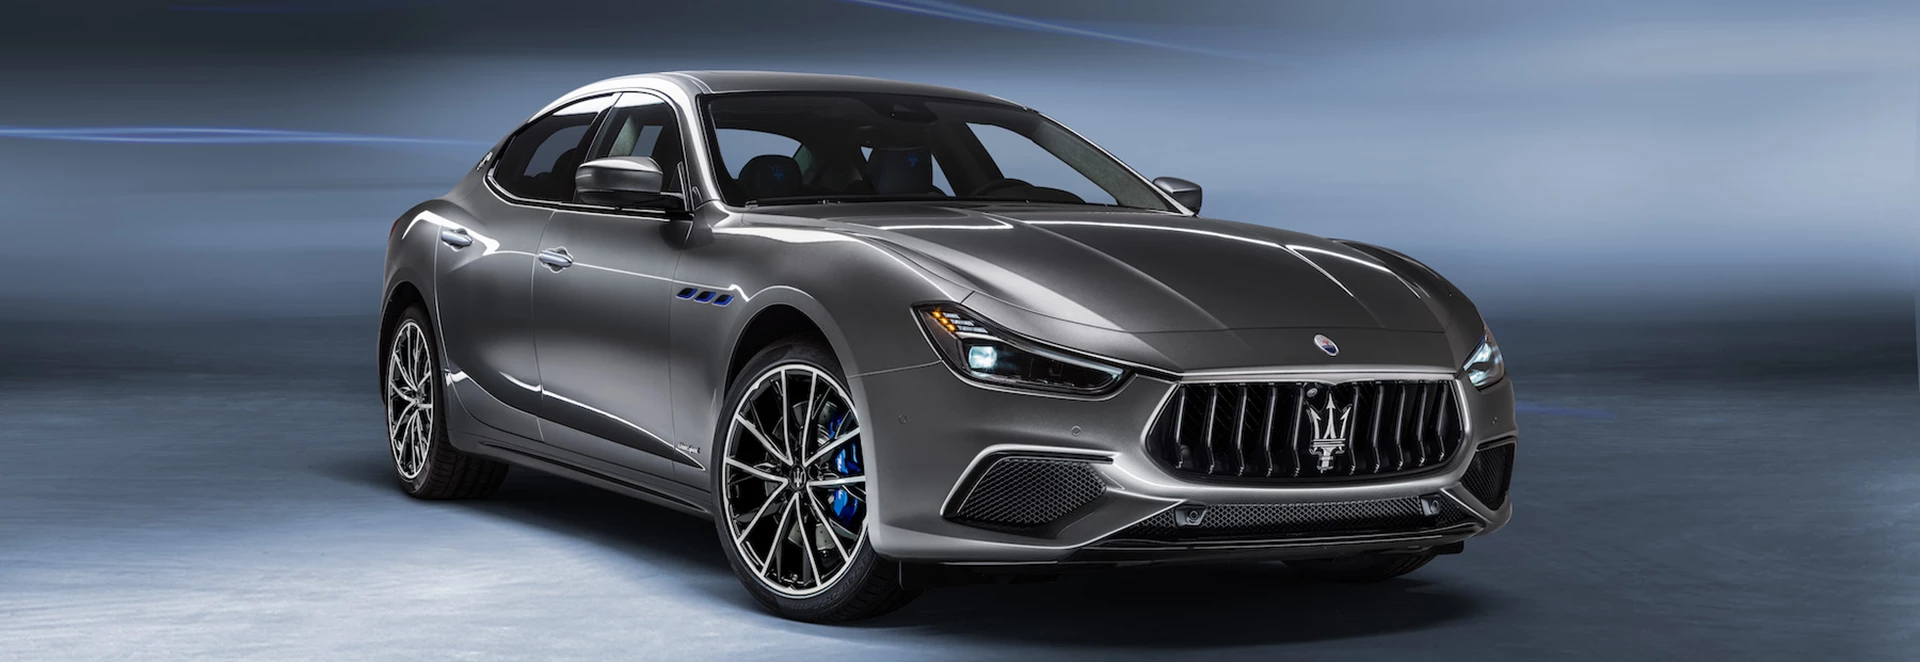 Maserati unveils first electrified model with new Ghibli Hybrid 